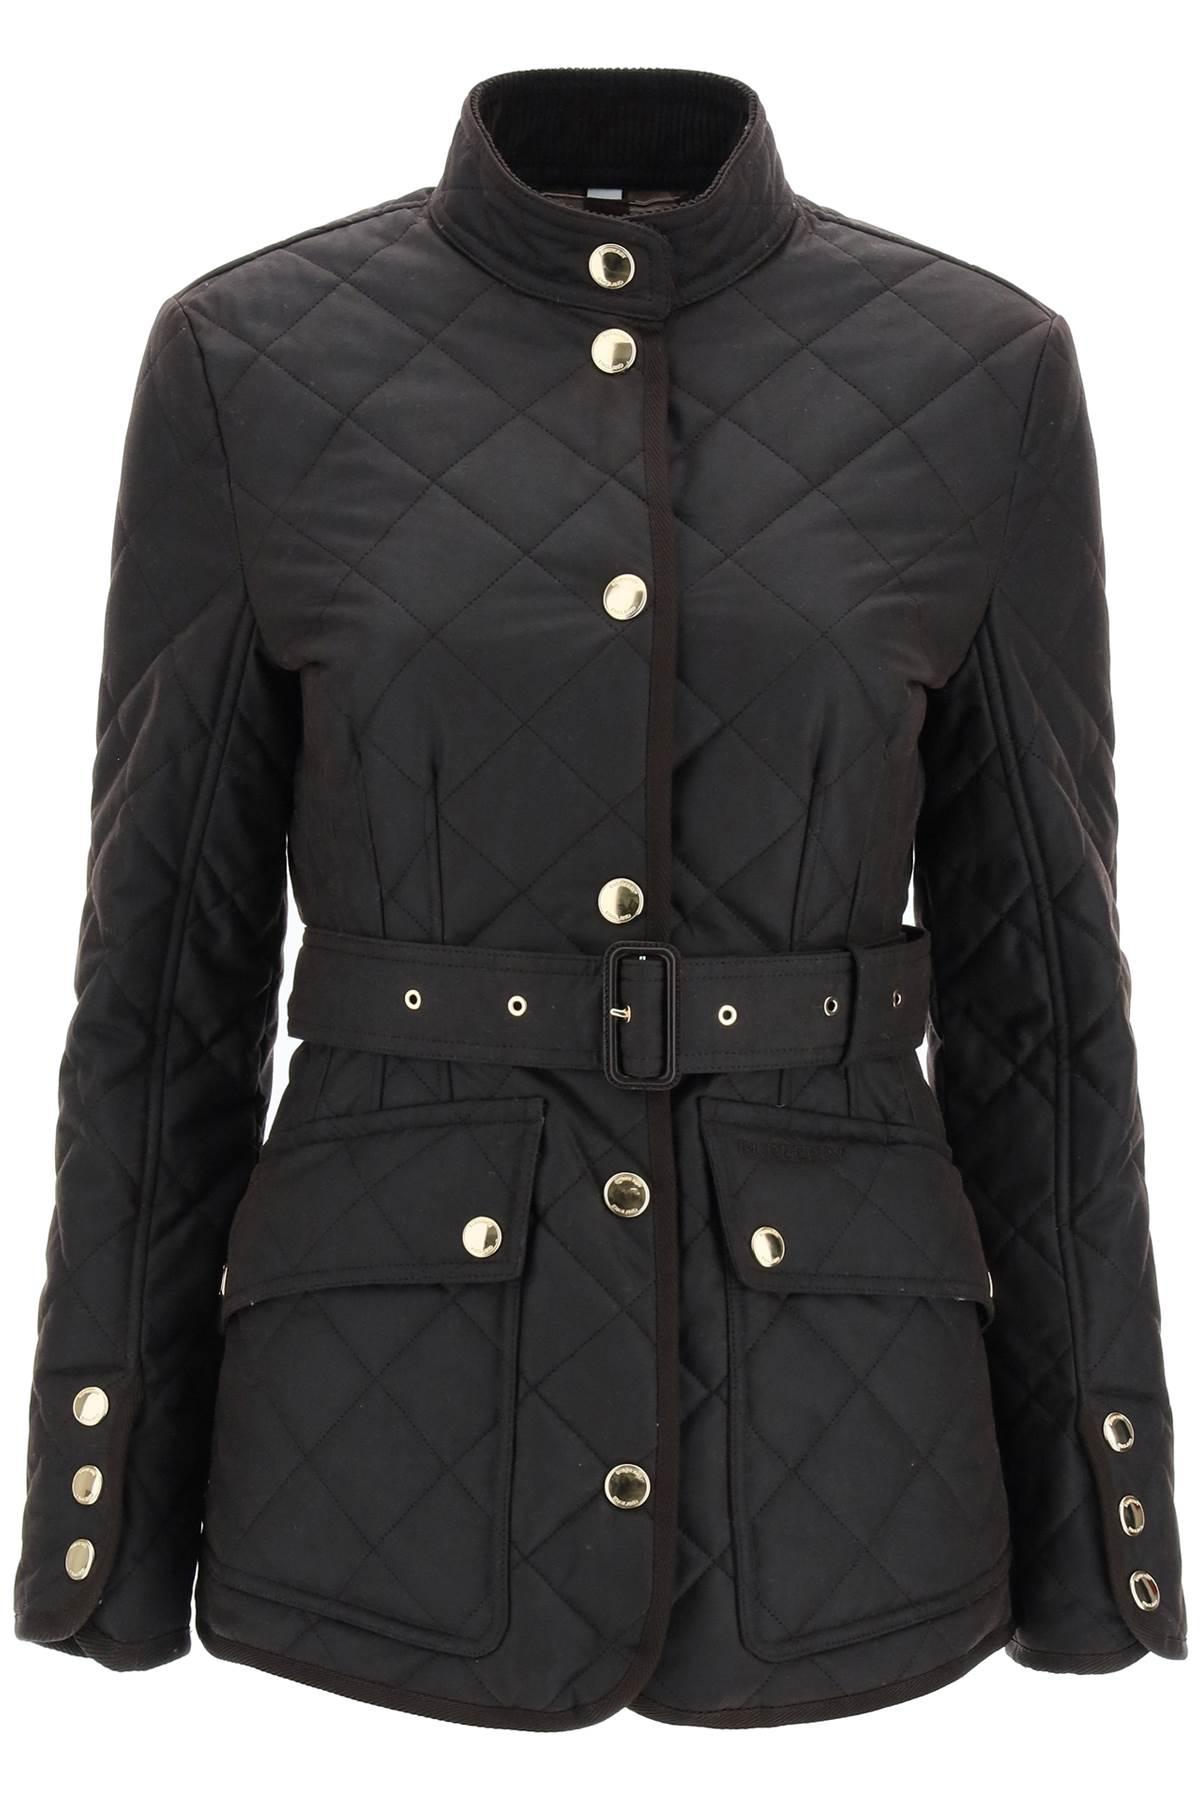 Burberry Quilted Waxed Jacket in Black | Lyst